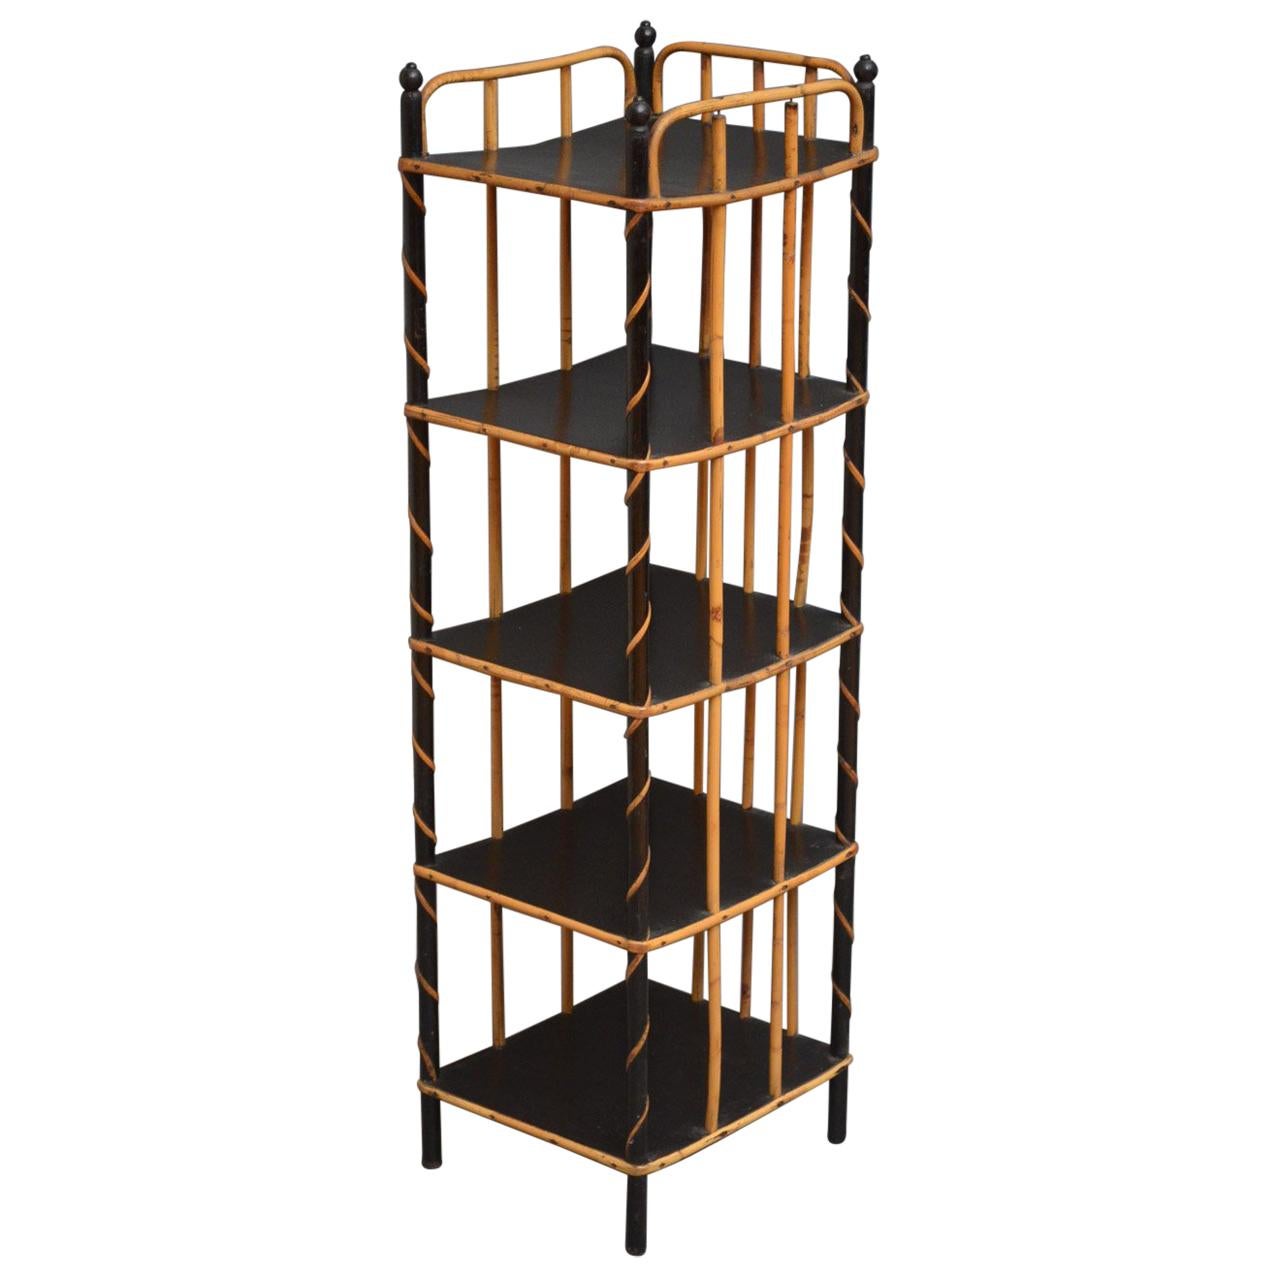 Turn of the Century Shoe Stand - Shoe Rack